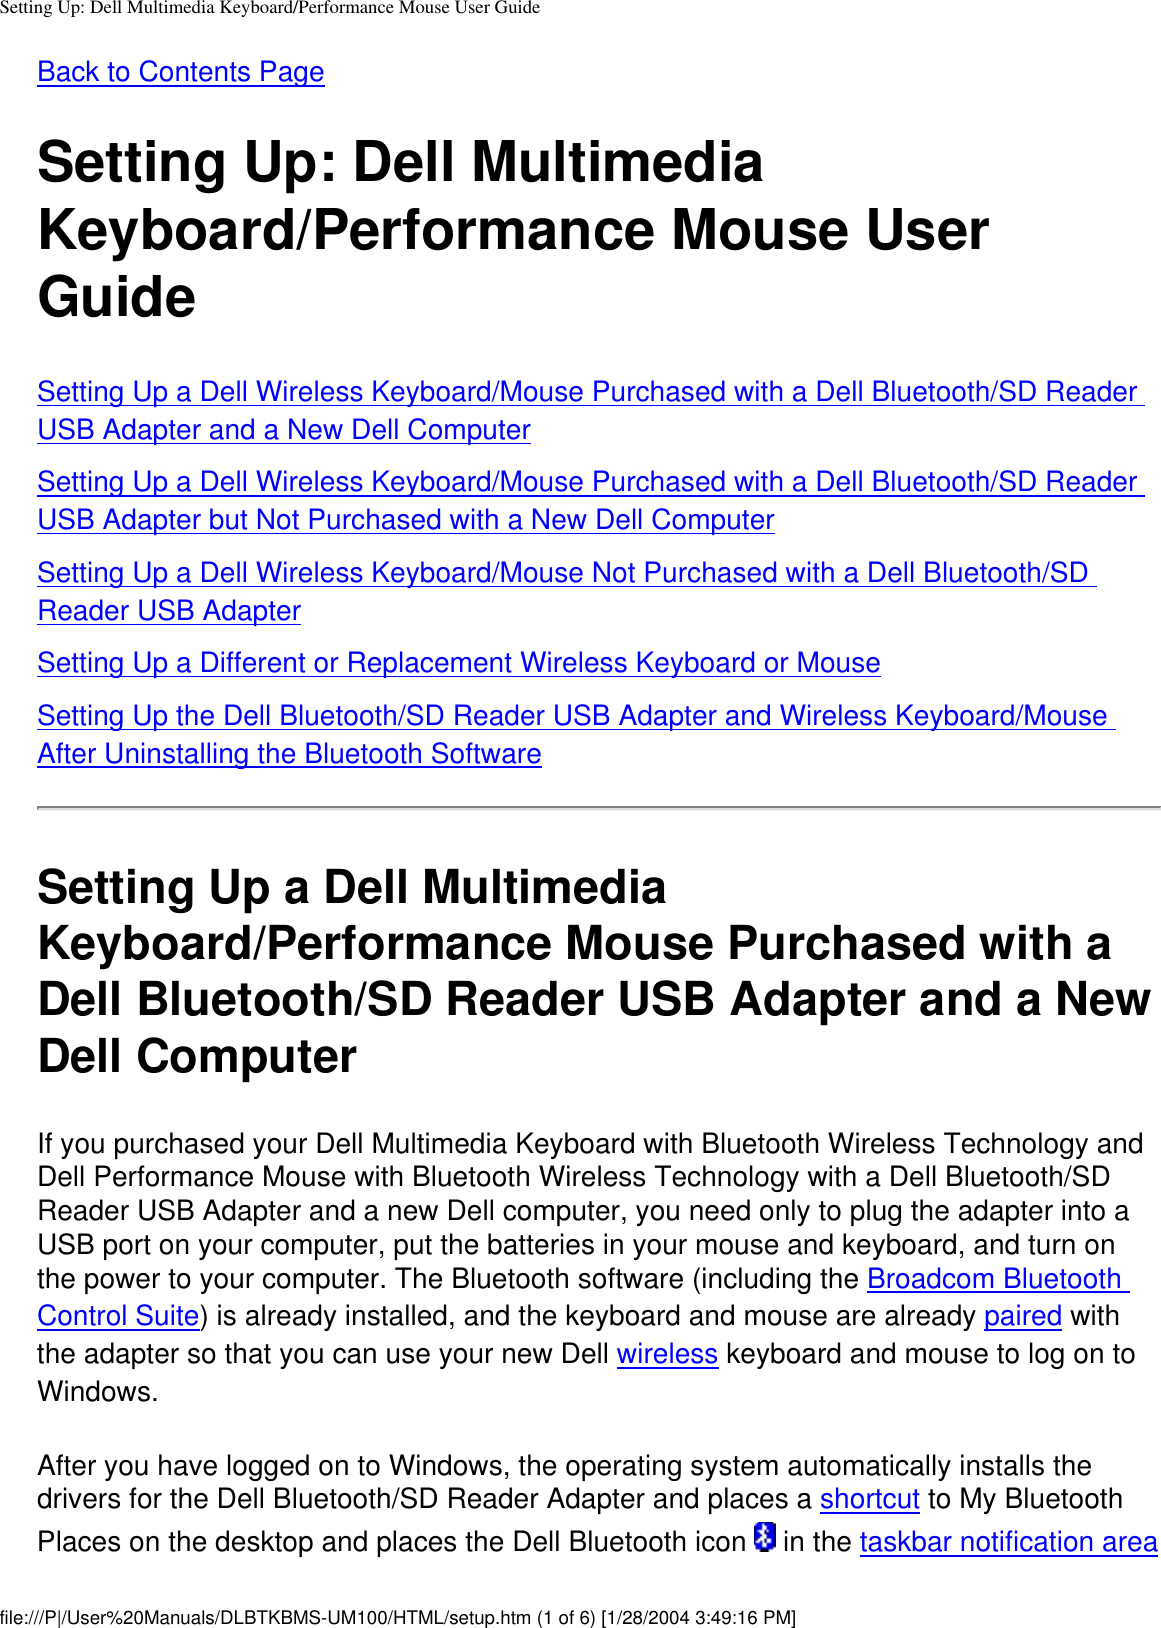 Setting Up: Dell Multimedia Keyboard/Performance Mouse User GuideBack to Contents Page Setting Up: Dell Multimedia Keyboard/Performance Mouse User GuideSetting Up a Dell Wireless Keyboard/Mouse Purchased with a Dell Bluetooth/SD Reader USB Adapter and a New Dell ComputerSetting Up a Dell Wireless Keyboard/Mouse Purchased with a Dell Bluetooth/SD Reader USB Adapter but Not Purchased with a New Dell ComputerSetting Up a Dell Wireless Keyboard/Mouse Not Purchased with a Dell Bluetooth/SD Reader USB AdapterSetting Up a Different or Replacement Wireless Keyboard or MouseSetting Up the Dell Bluetooth/SD Reader USB Adapter and Wireless Keyboard/Mouse After Uninstalling the Bluetooth SoftwareSetting Up a Dell Multimedia Keyboard/Performance Mouse Purchased with a Dell Bluetooth/SD Reader USB Adapter and a New Dell ComputerIf you purchased your Dell Multimedia Keyboard with Bluetooth Wireless Technology and Dell Performance Mouse with Bluetooth Wireless Technology with a Dell Bluetooth/SD Reader USB Adapter and a new Dell computer, you need only to plug the adapter into a USB port on your computer, put the batteries in your mouse and keyboard, and turn on the power to your computer. The Bluetooth software (including the Broadcom Bluetooth Control Suite) is already installed, and the keyboard and mouse are already paired with the adapter so that you can use your new Dell wireless keyboard and mouse to log on to Windows.After you have logged on to Windows, the operating system automatically installs the drivers for the Dell Bluetooth/SD Reader Adapter and places a shortcut to My Bluetooth Places on the desktop and places the Dell Bluetooth icon   in the taskbar notification area file:///P|/User%20Manuals/DLBTKBMS-UM100/HTML/setup.htm (1 of 6) [1/28/2004 3:49:16 PM]